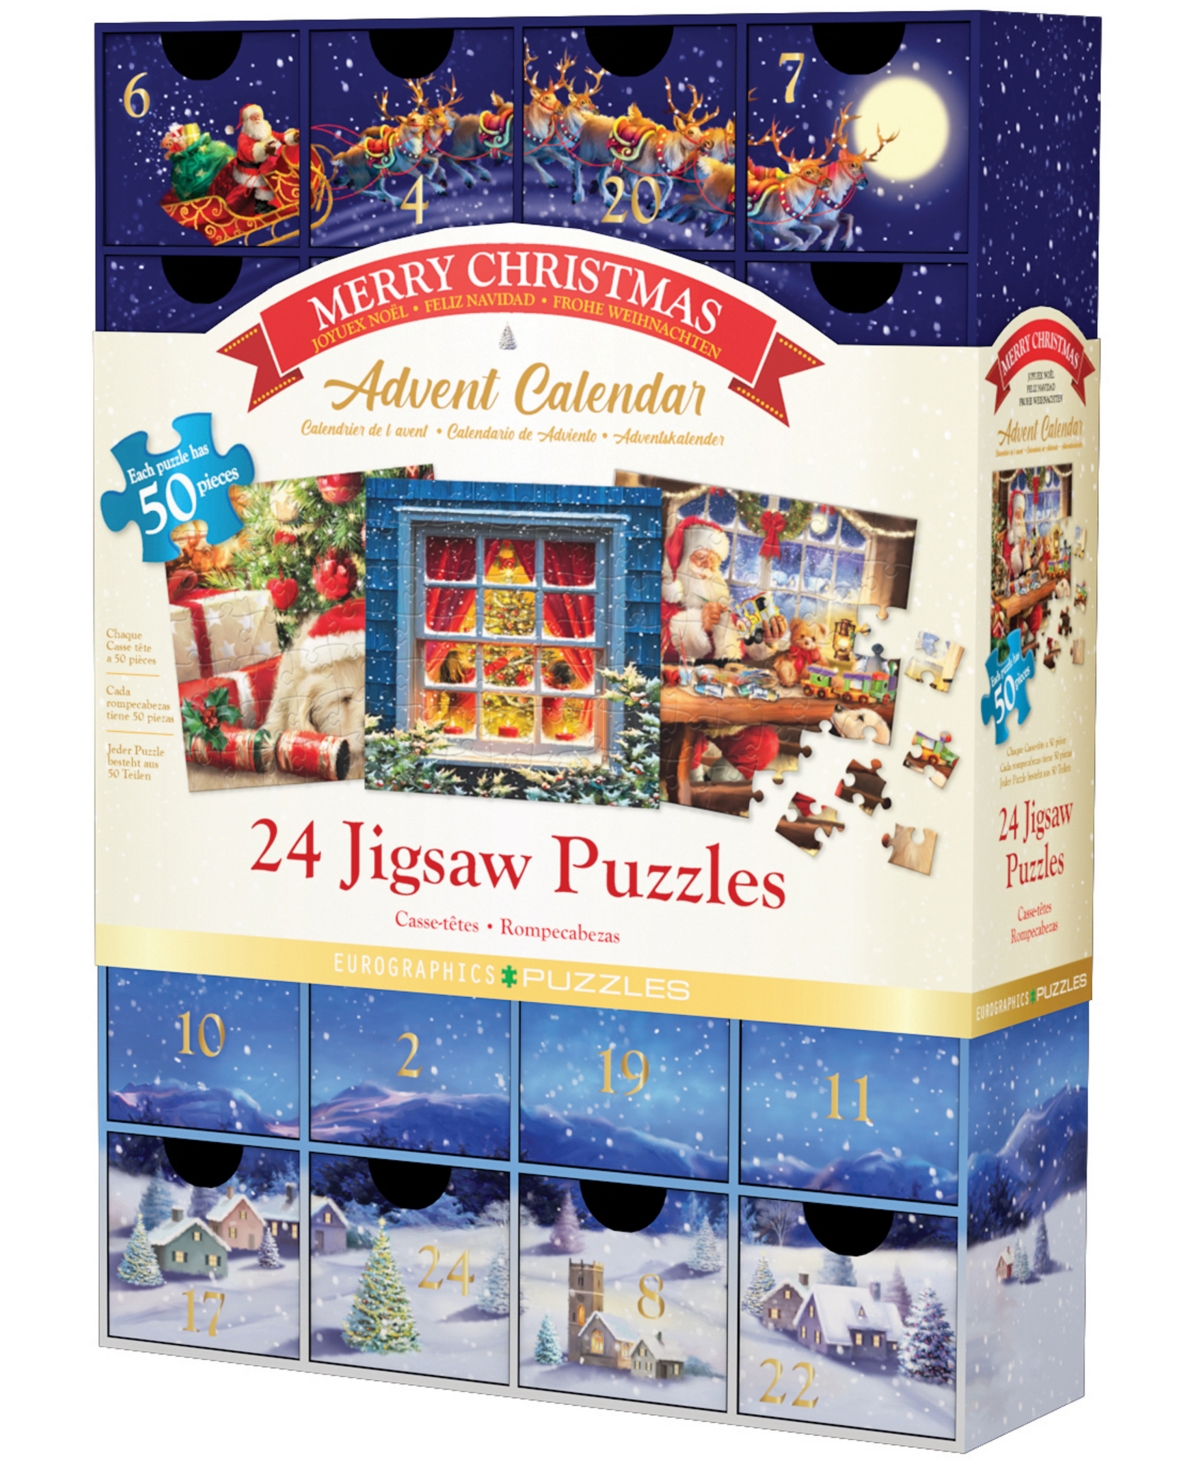 University Games Babies' Eurographics Incorporated Merry Christmas Advent Calendar 24 Jigsaw Puzzles, 24 X 50 Pieces In No Color